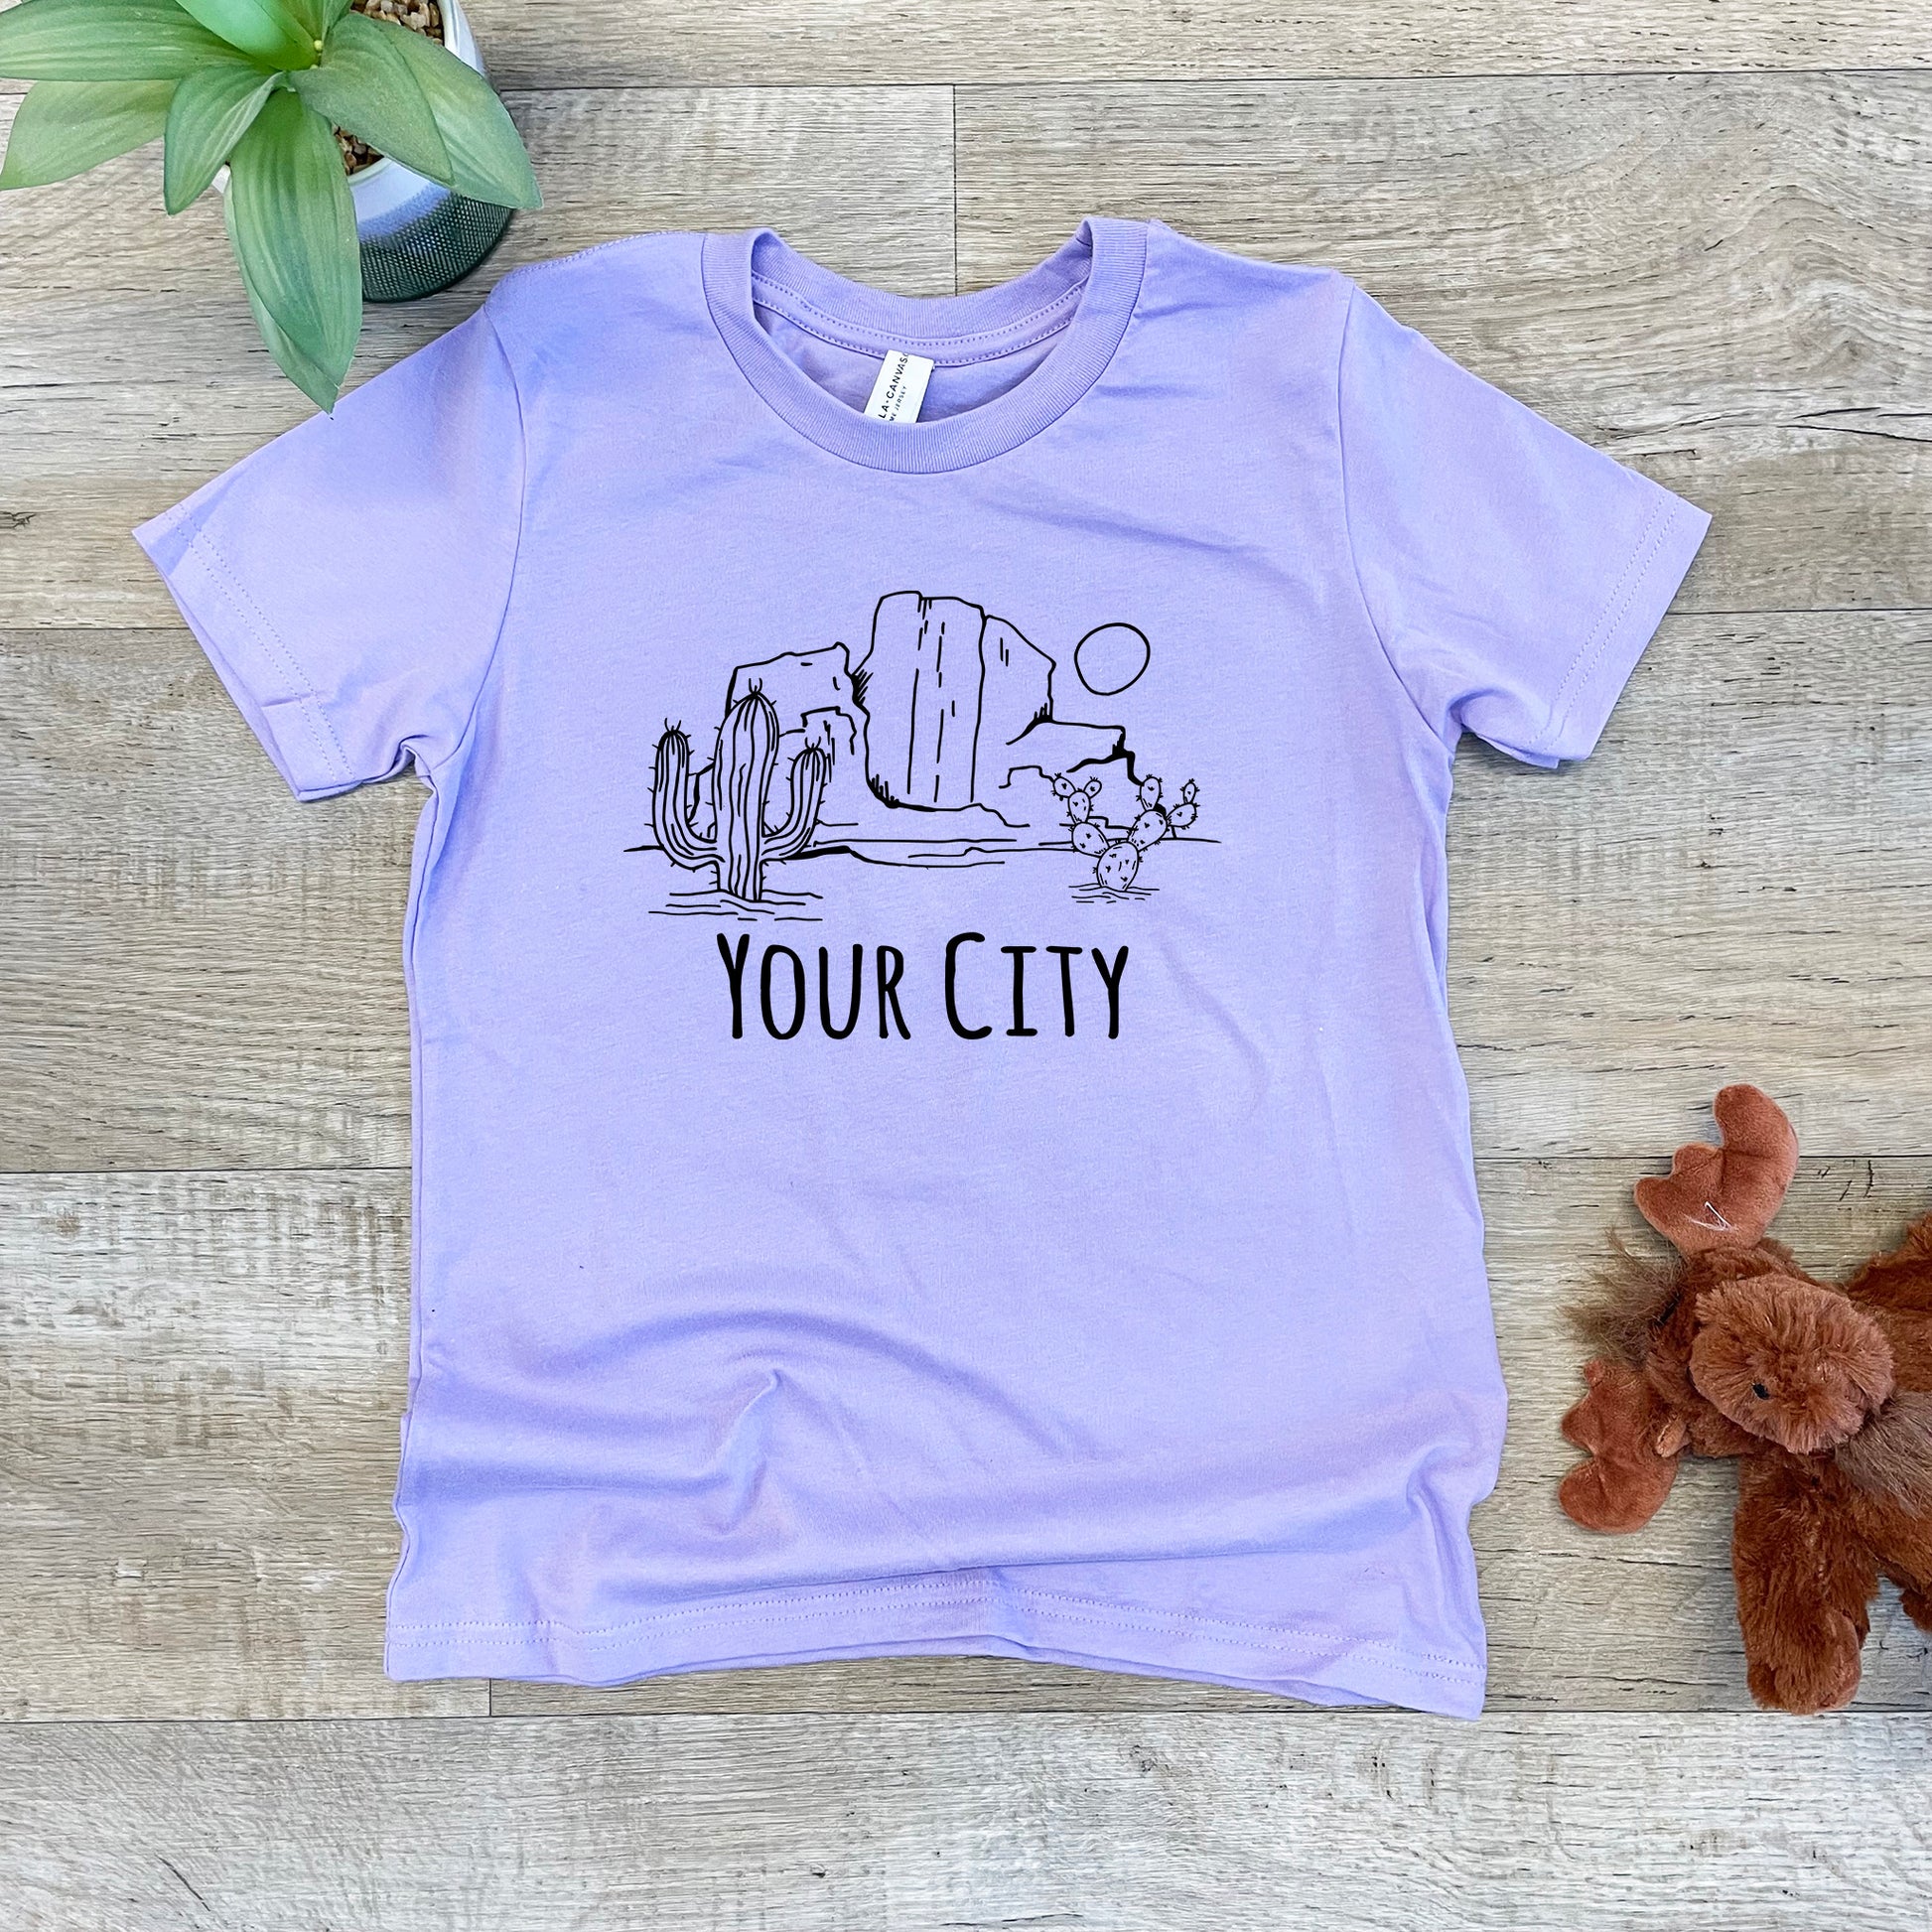 a t - shirt that says your city on it next to a teddy bear